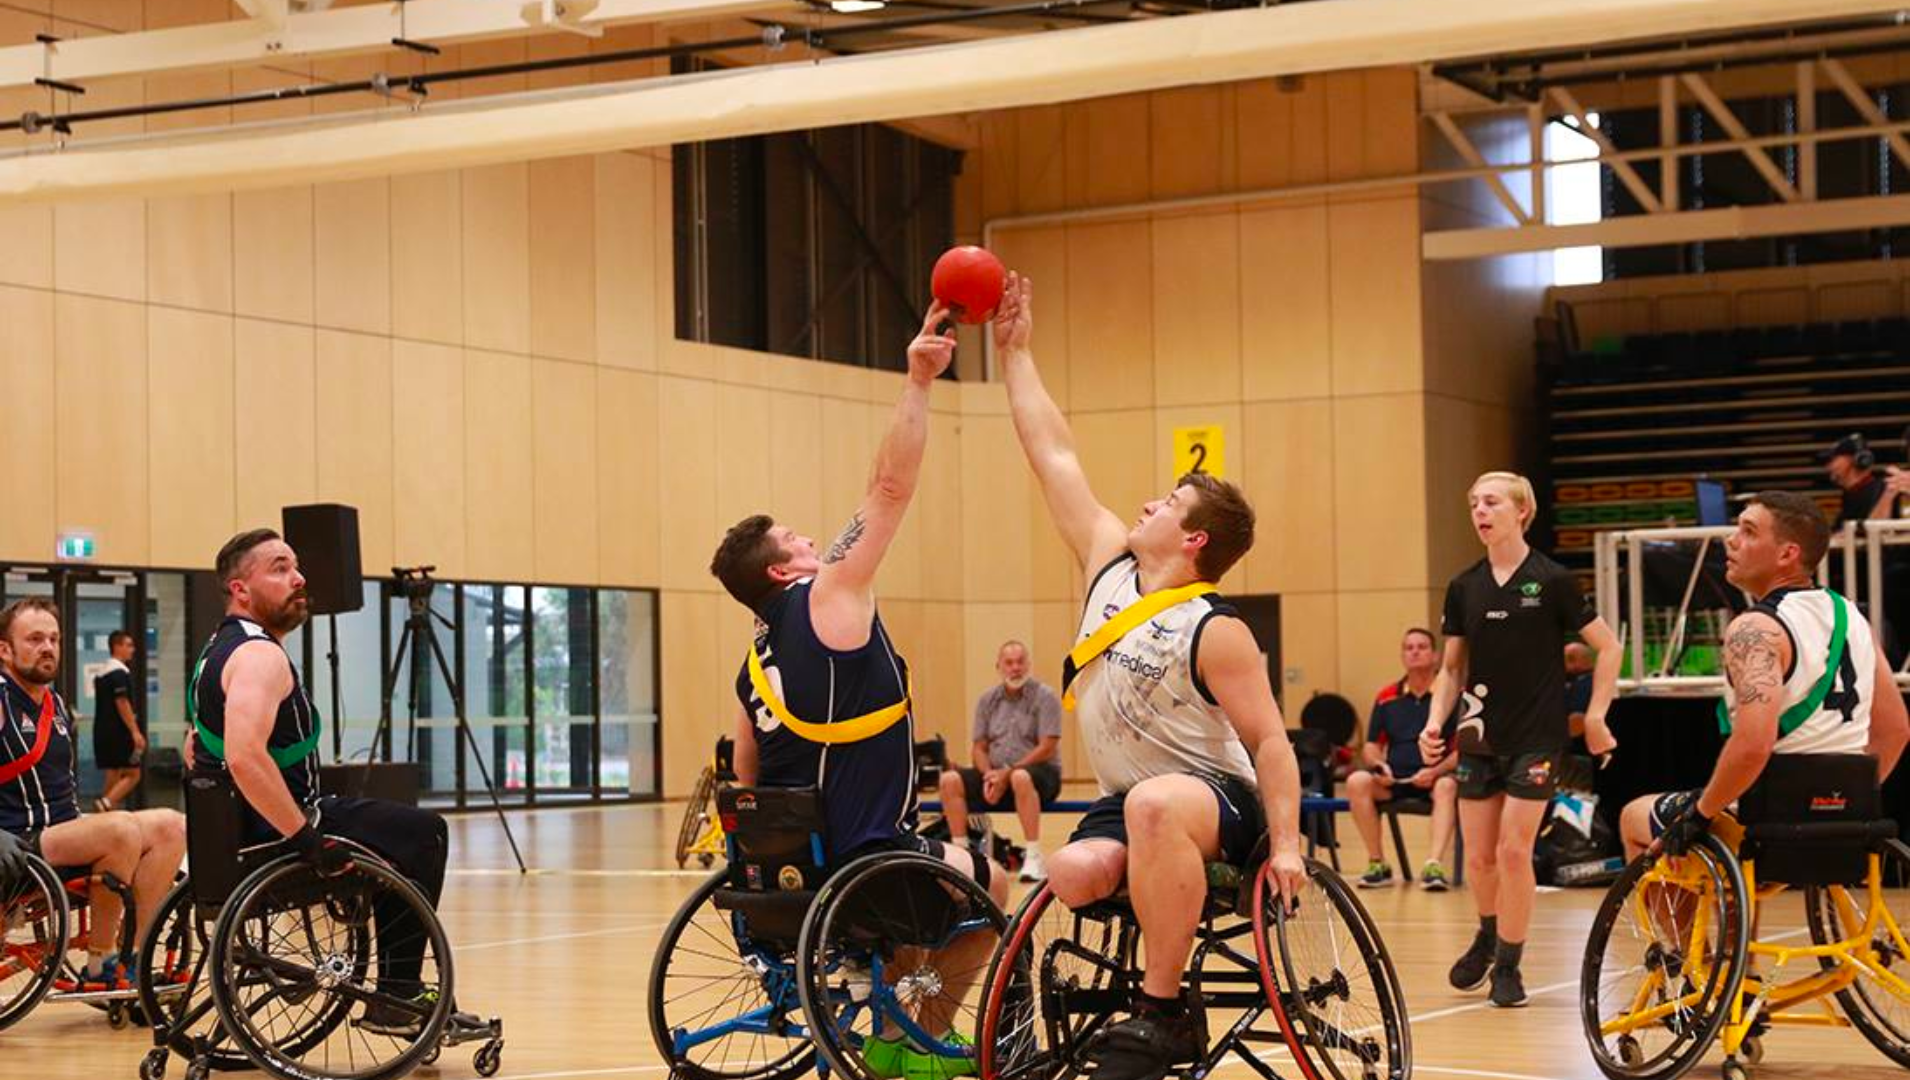 Action shot from a wheelchair AFL game showing two players going into tap a ball with their arms extended